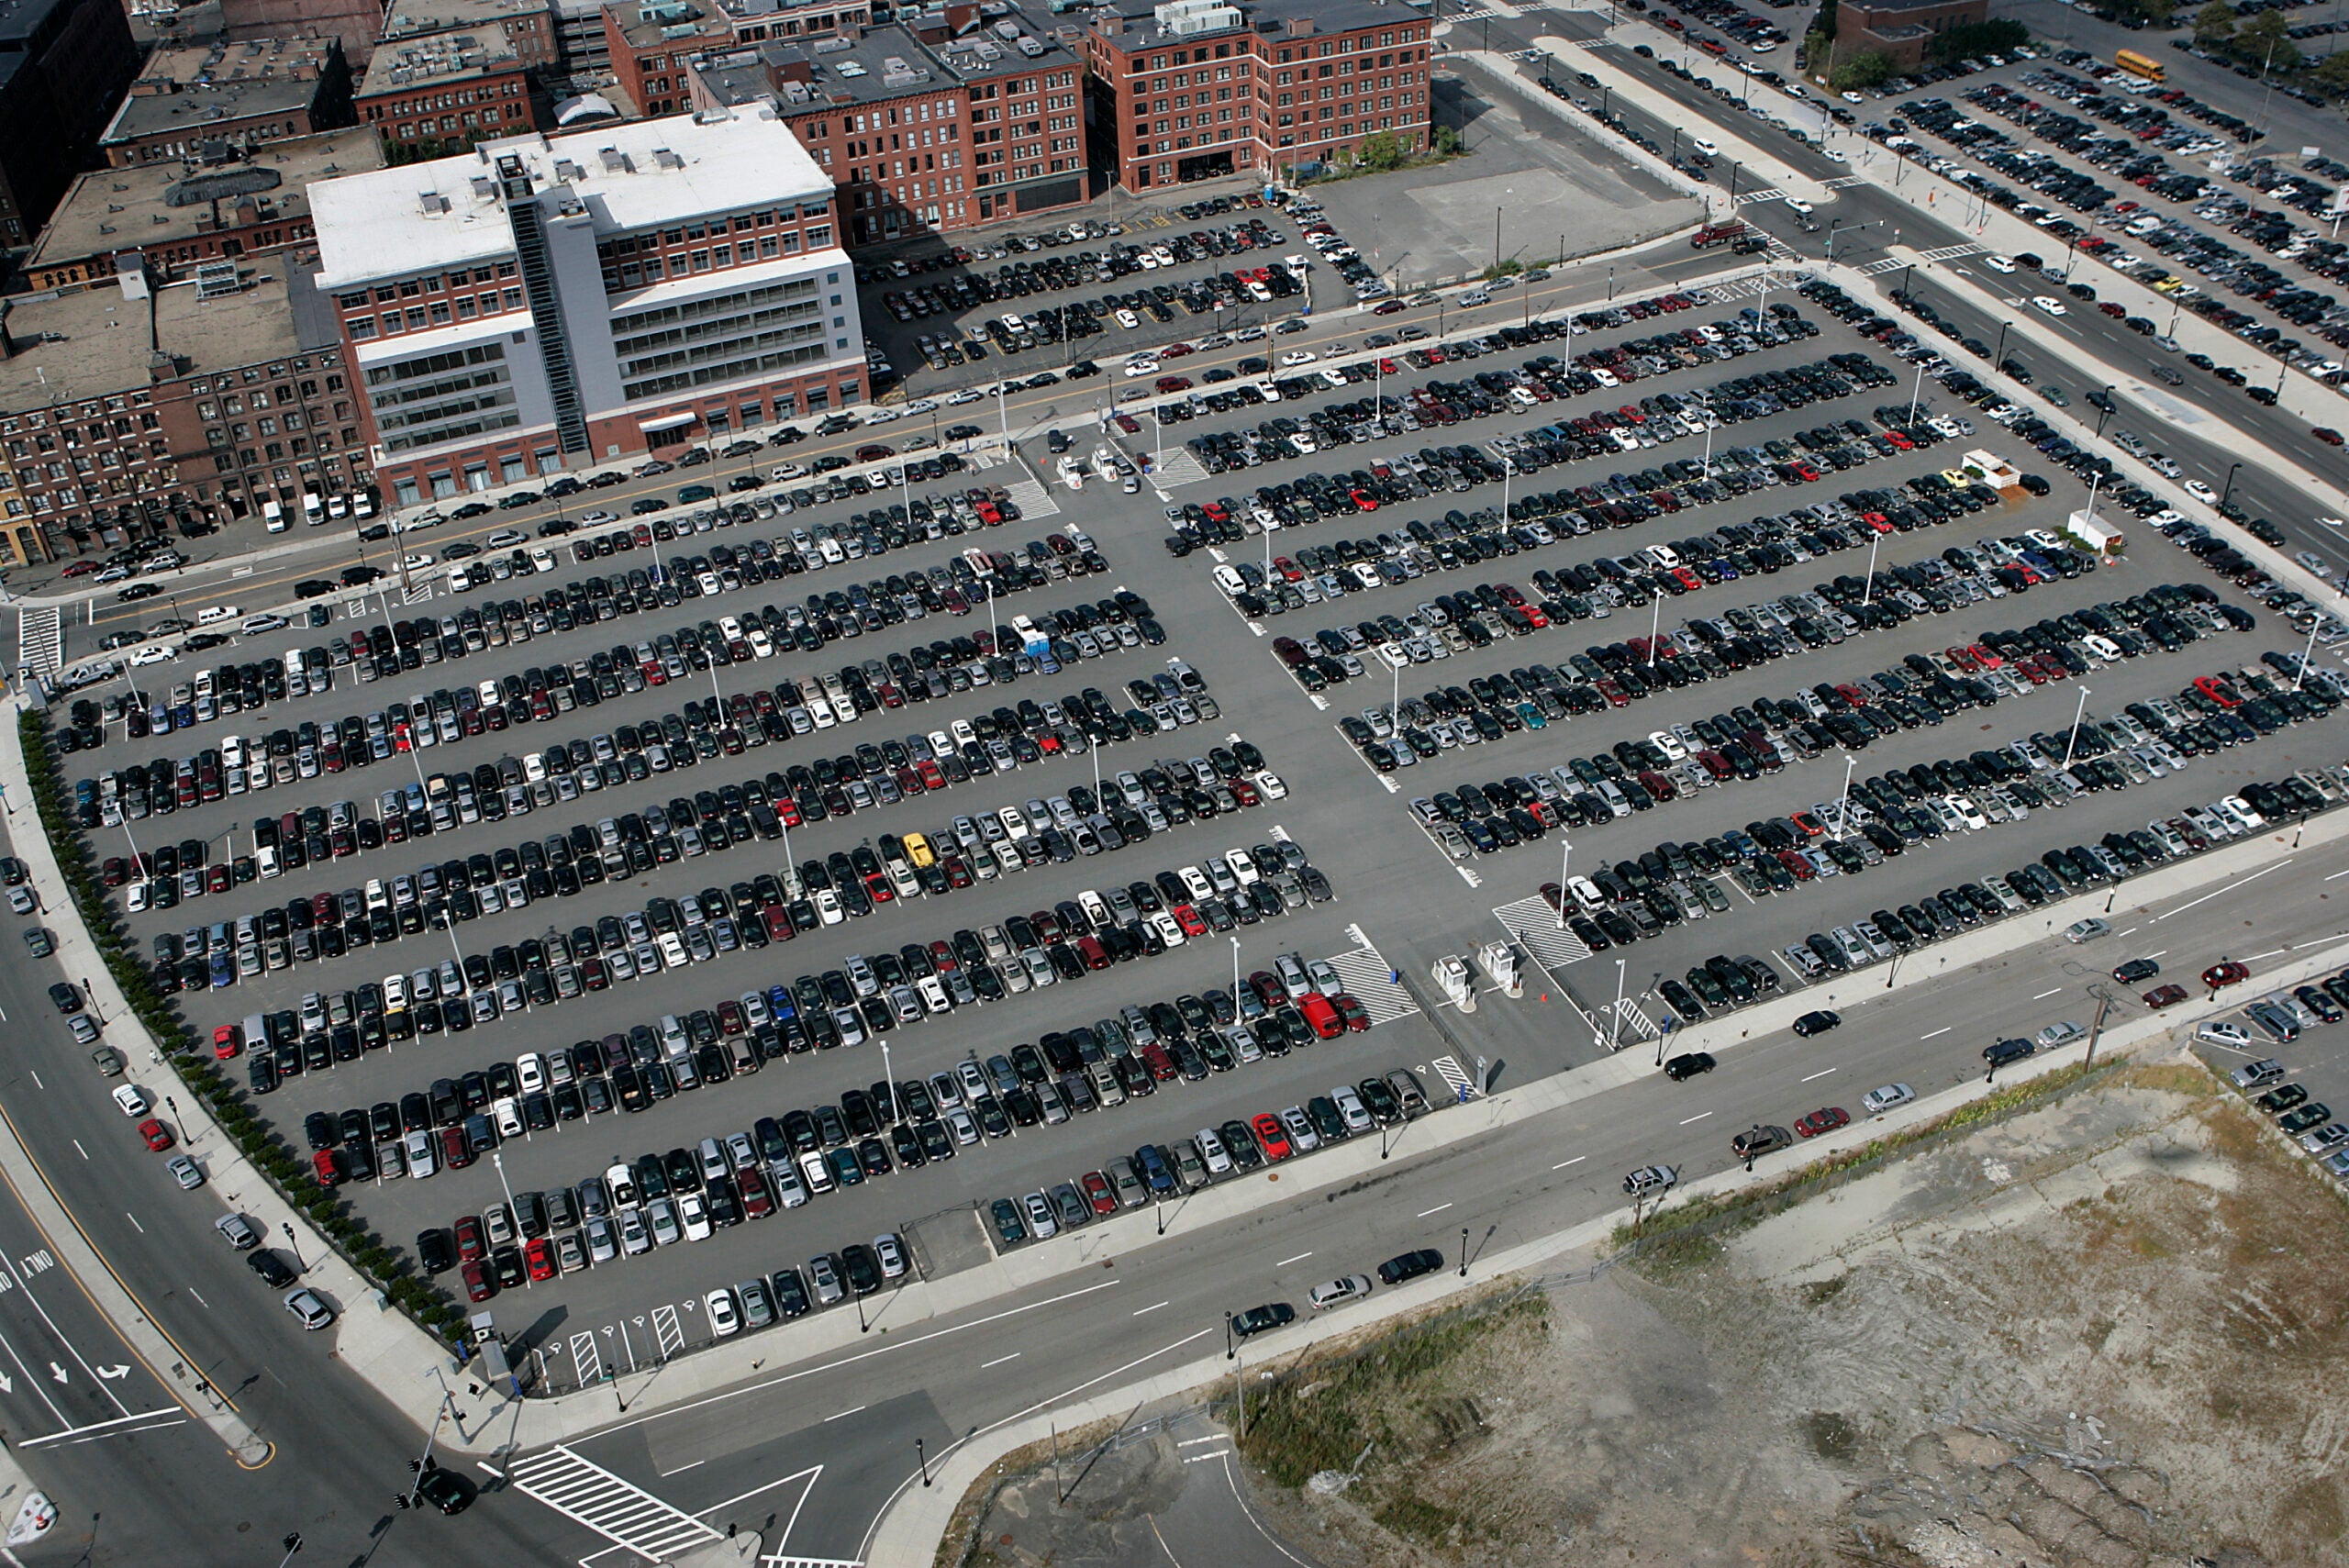 Boston's Seaport could soon get 2,100 new parking spots - The Boston Globe